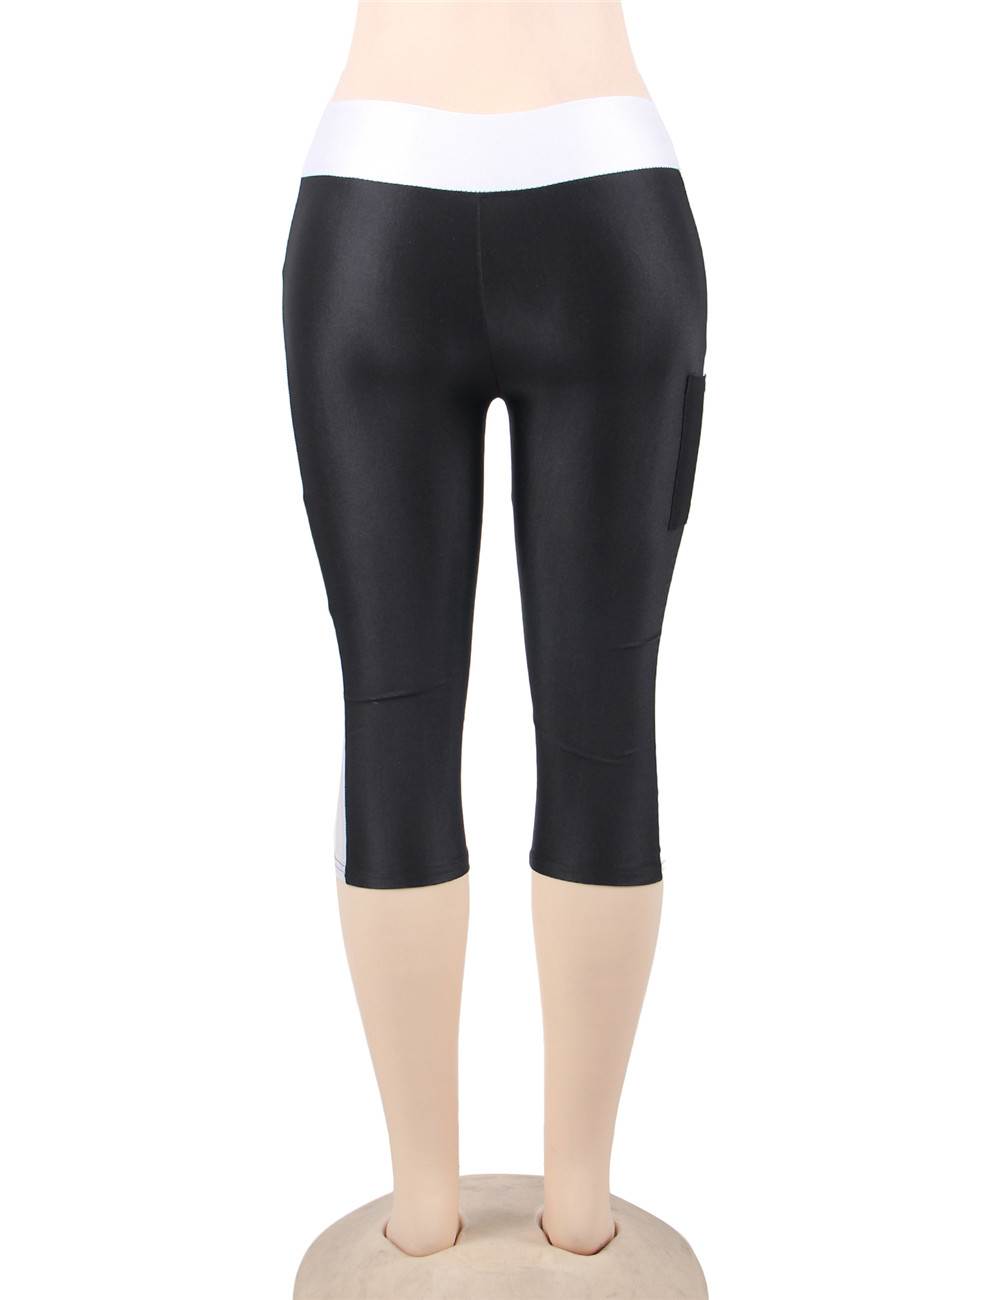 Women Exercise Tight Body Legging with Pockets | Ohyeah